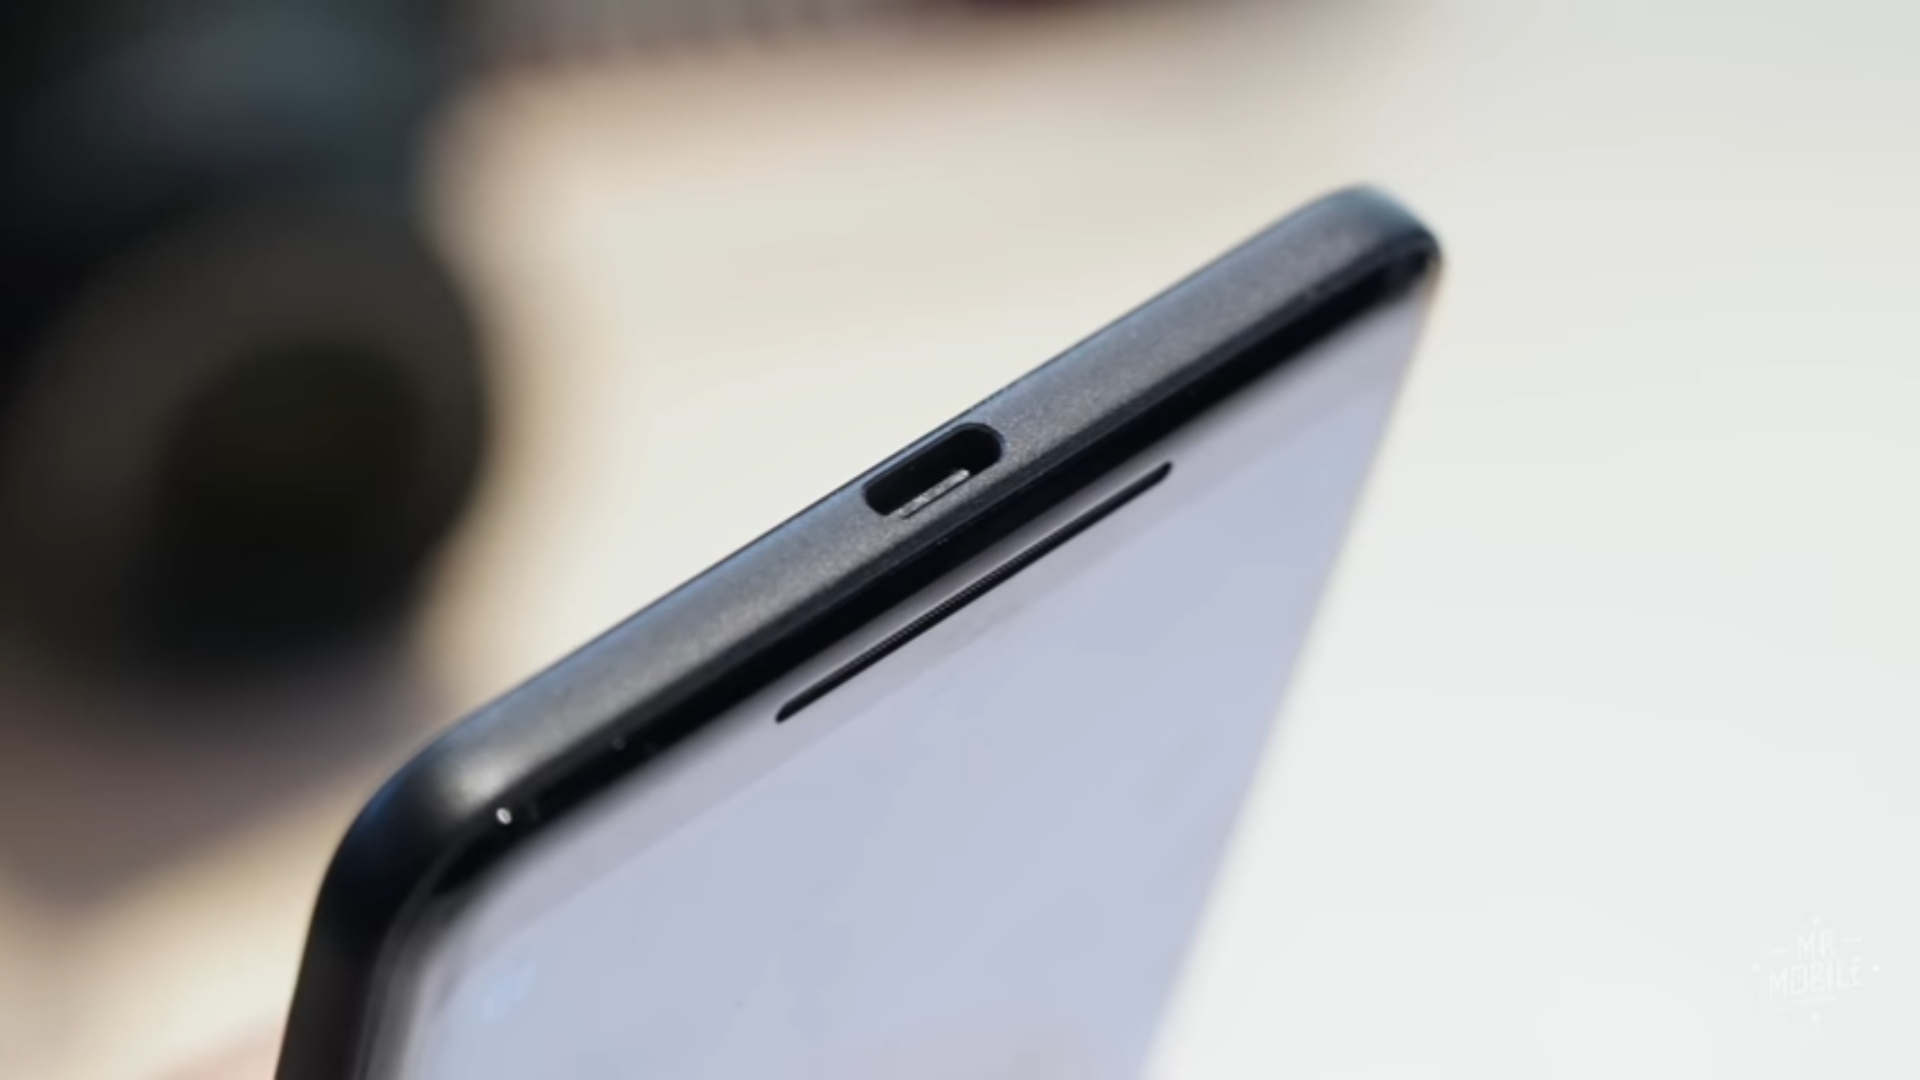 Why Google removed the 3.5 mm headphone jack from Pixel 2